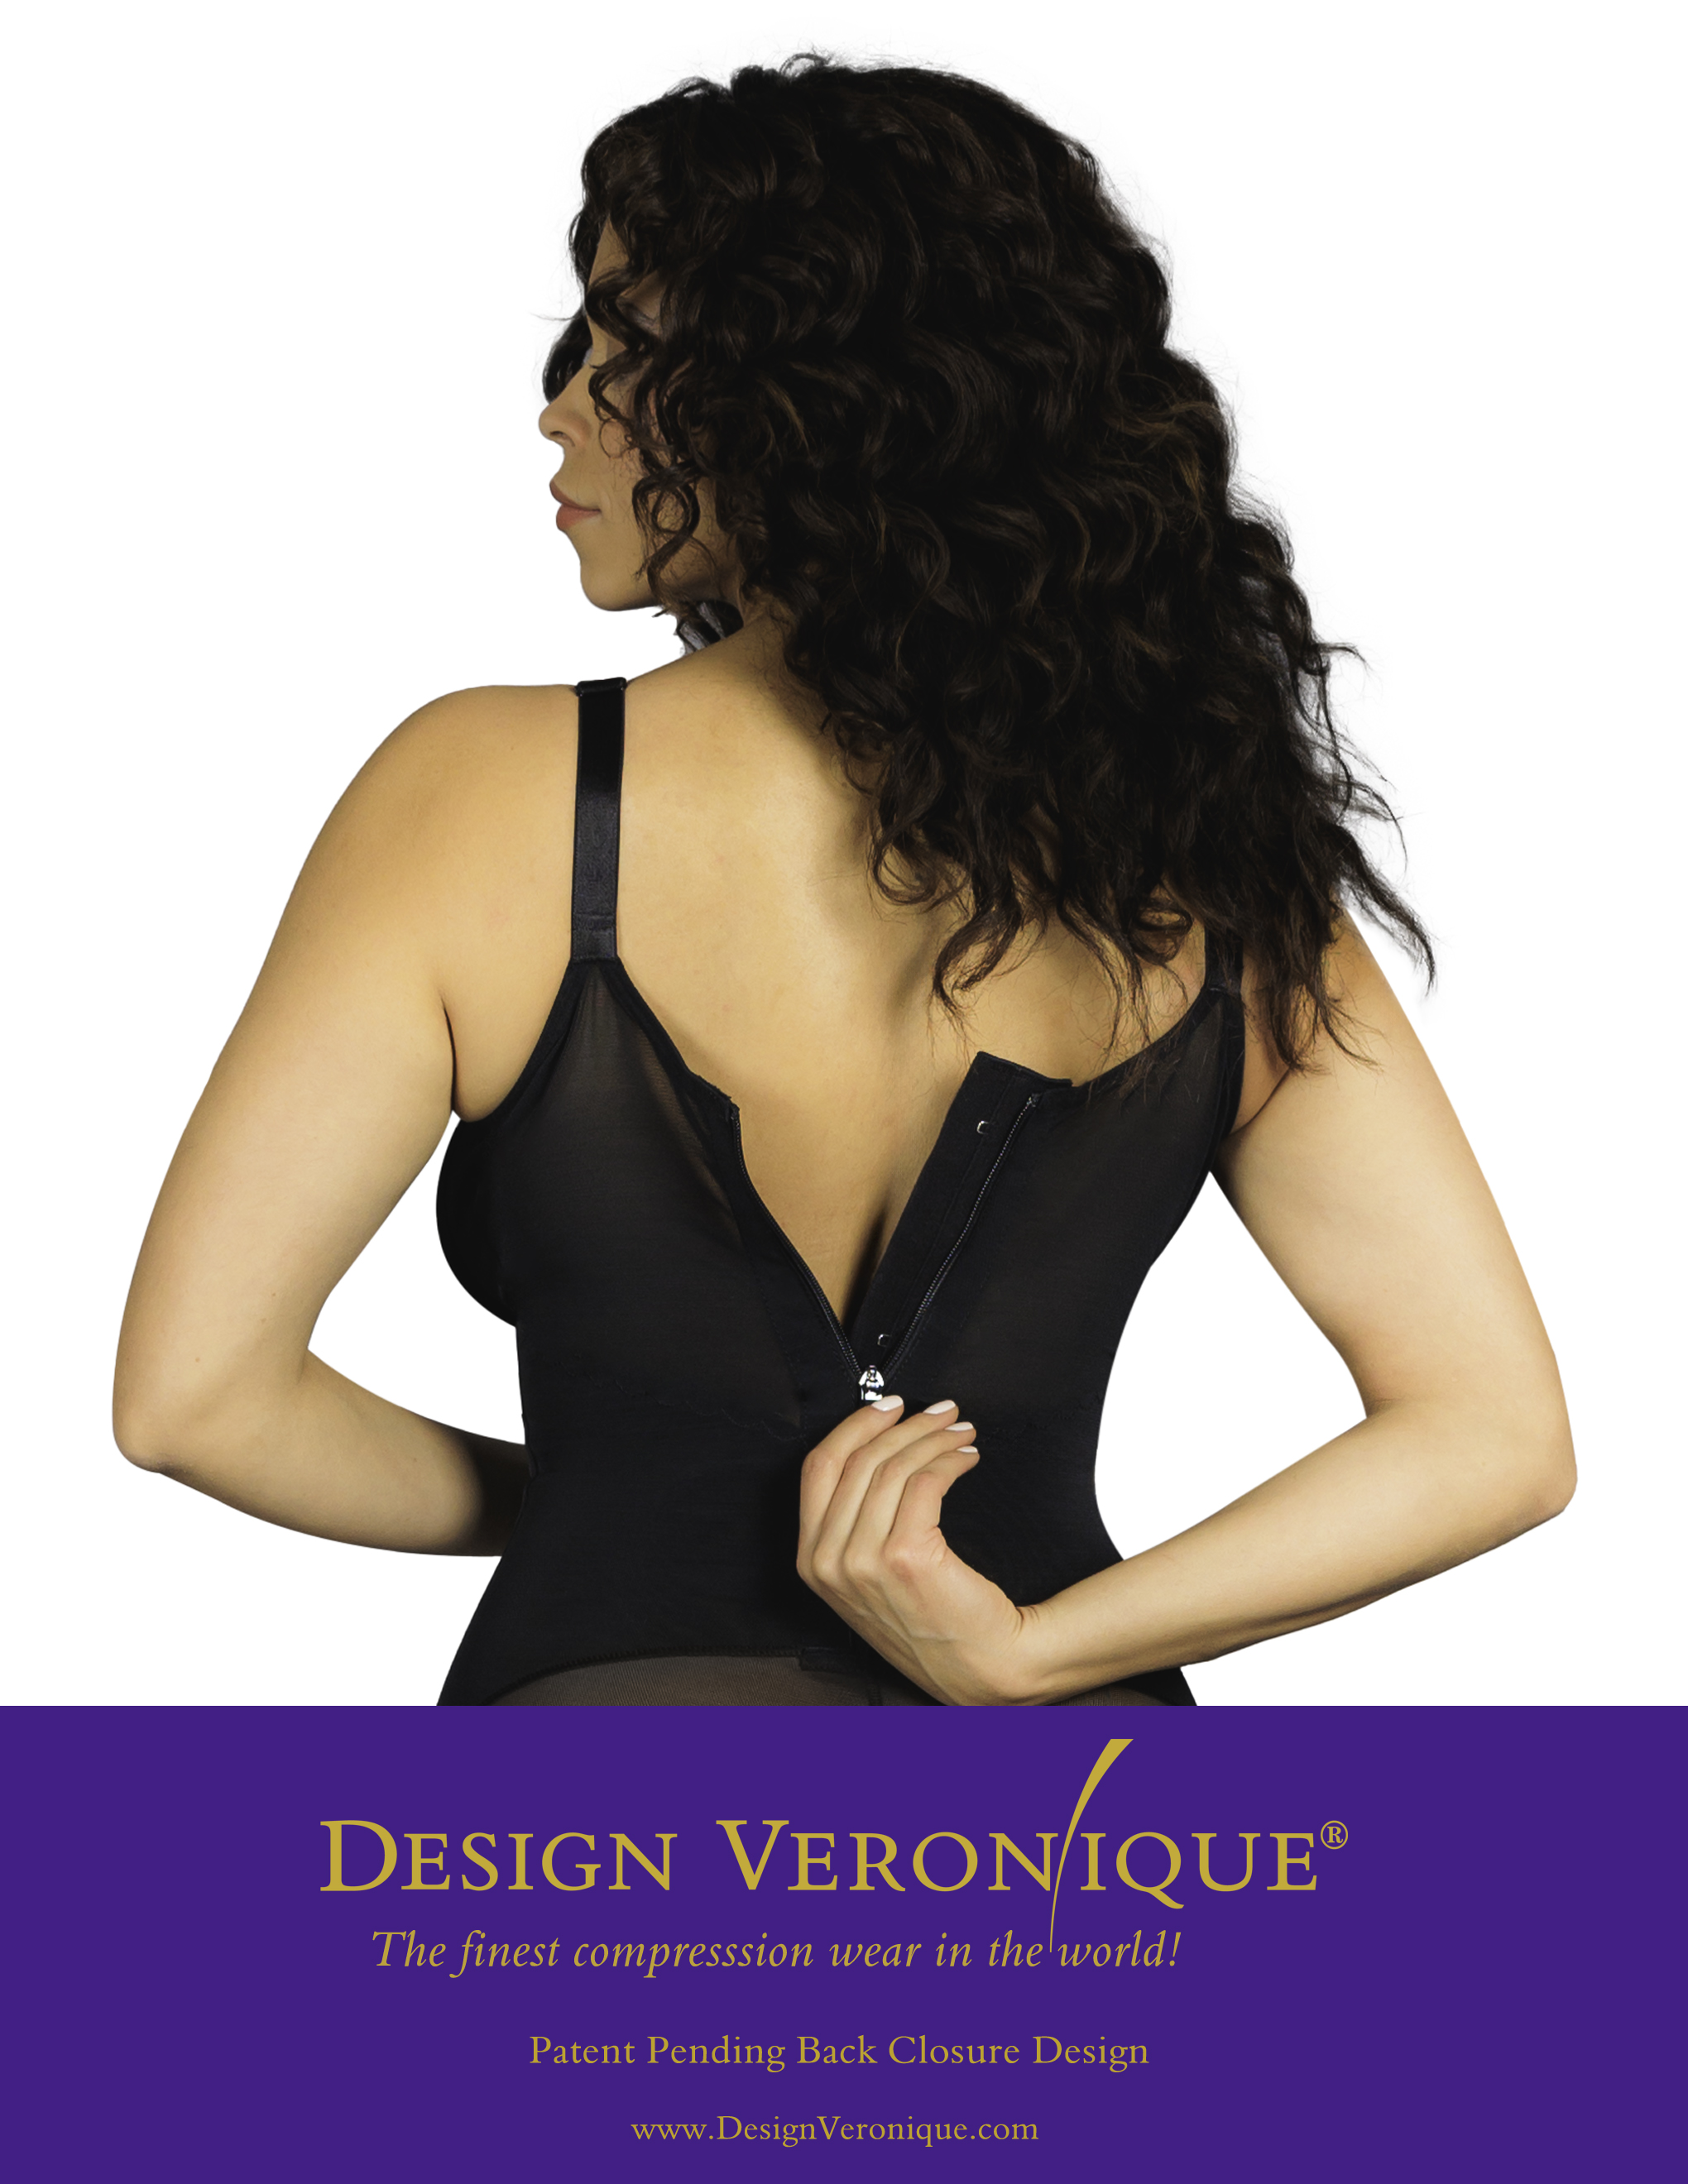 Design Veronique Introduces the First Post Surgical Compression